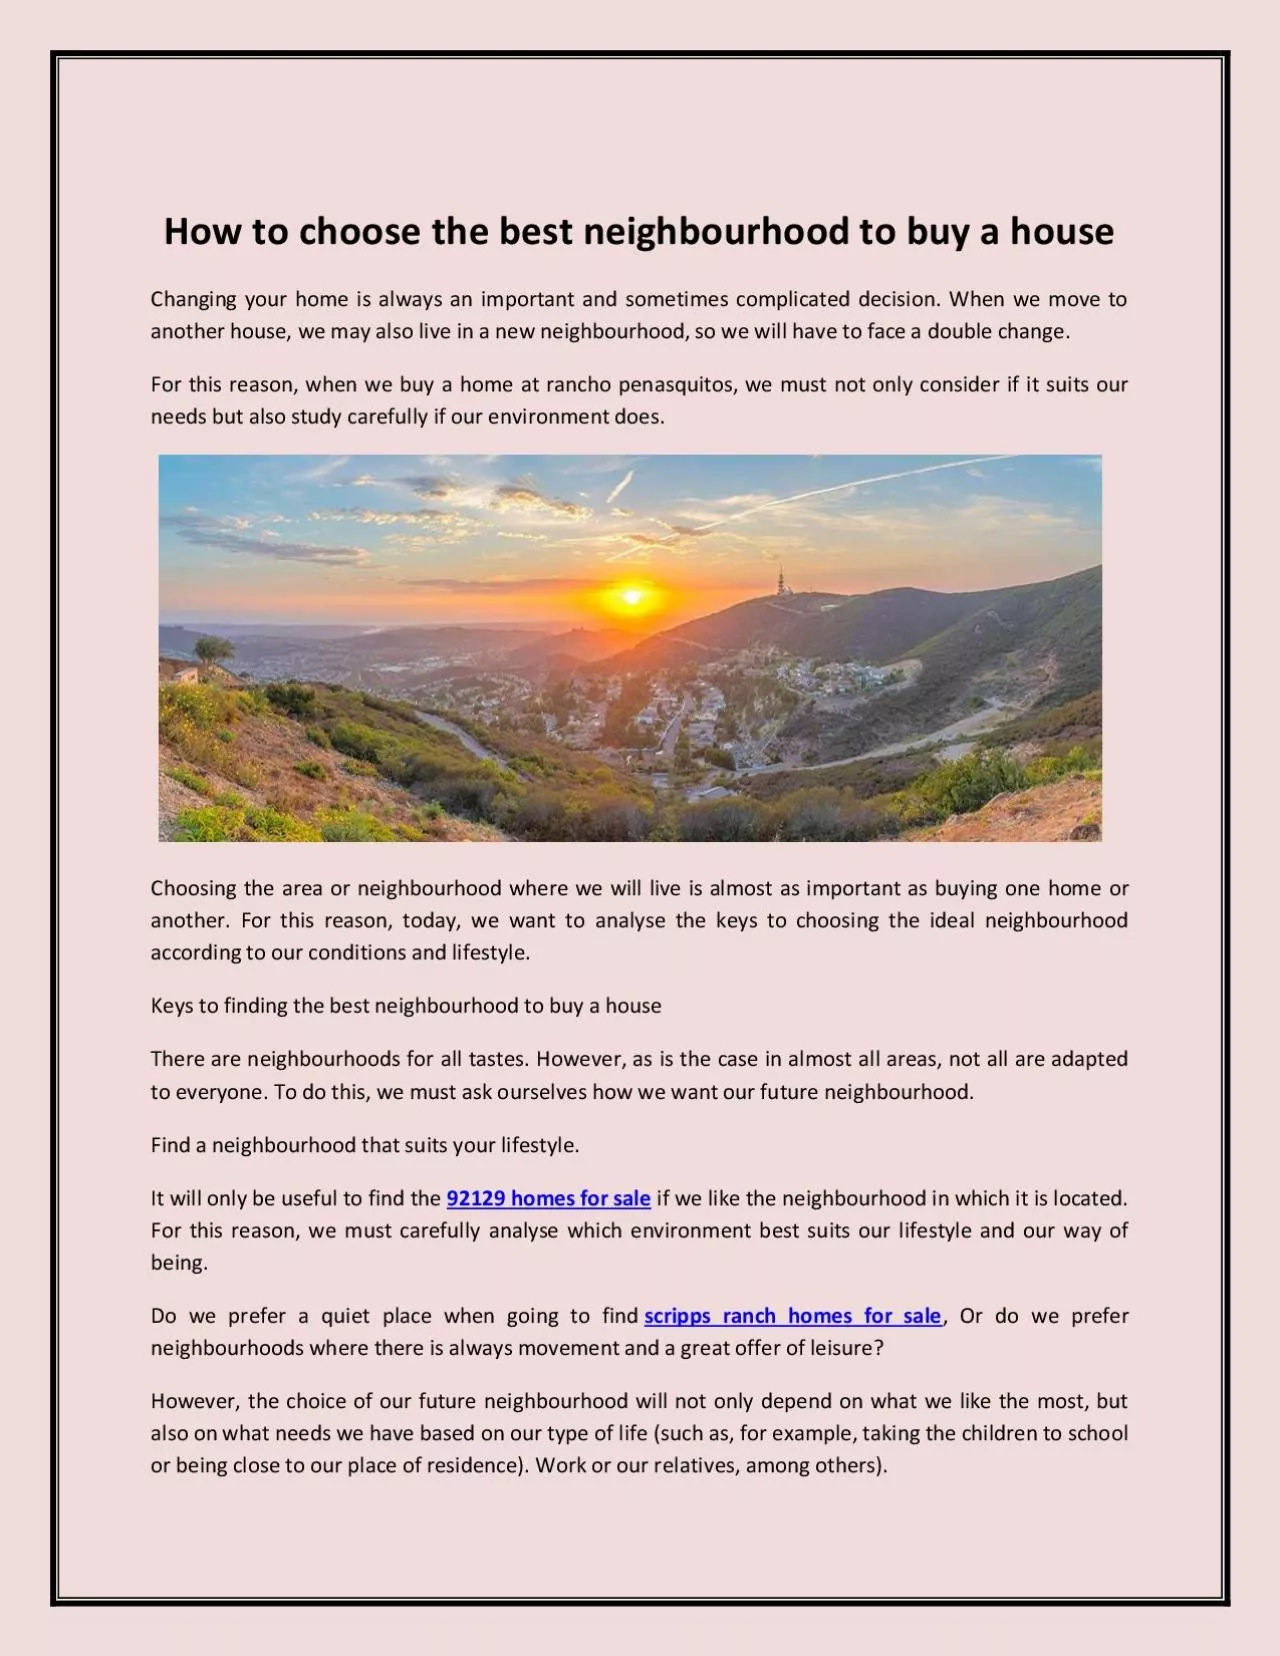 How to choose the best neighbourhood to buy a house